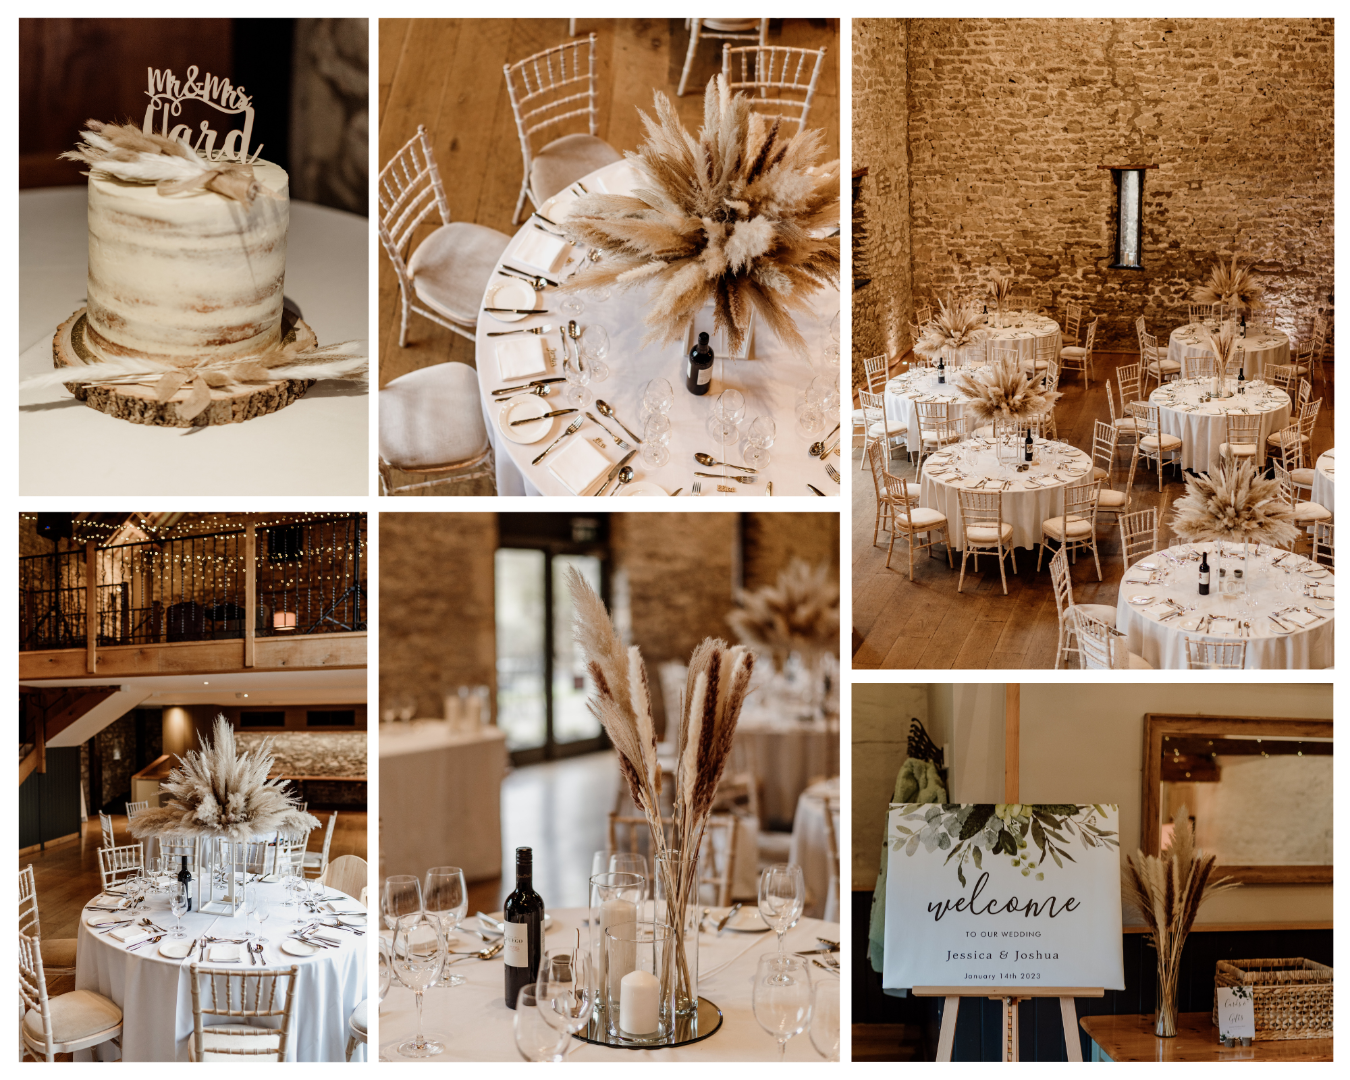 A collage of photos of a wedding reception with tables and chairs and a cake.